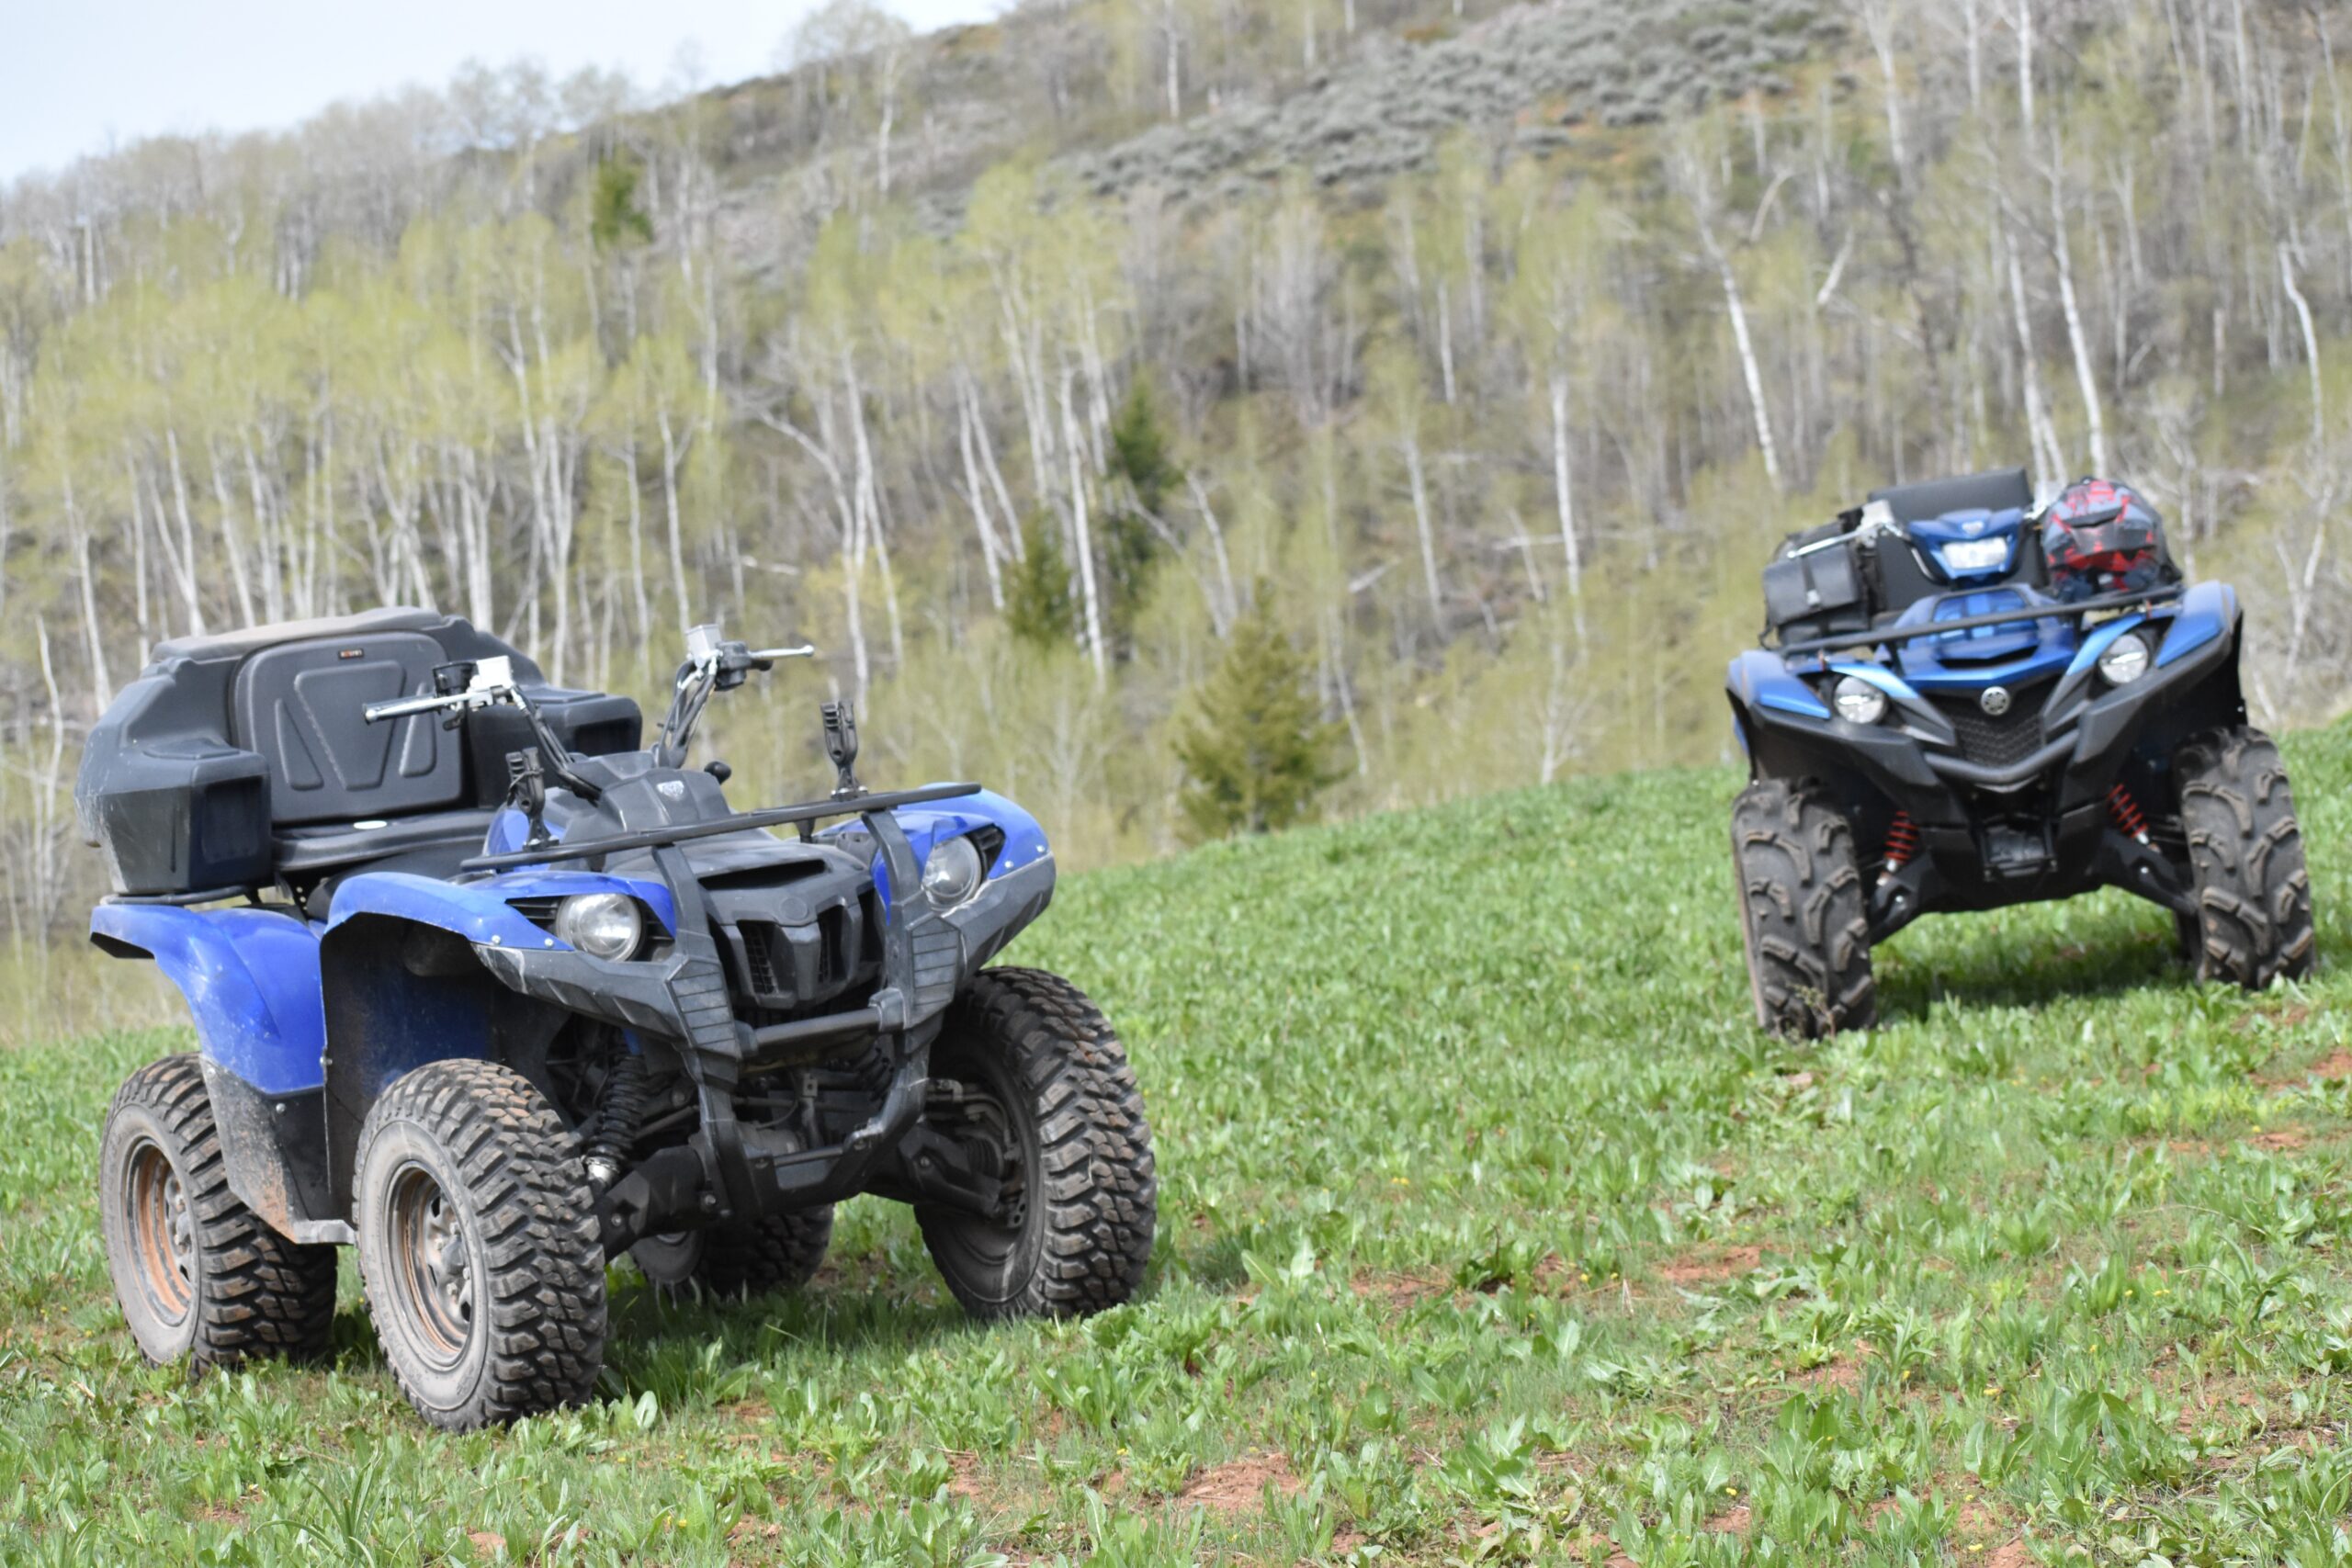 This is a pair of black and blue Polaris Ranger 700 XPs against a wooded forest landscape.